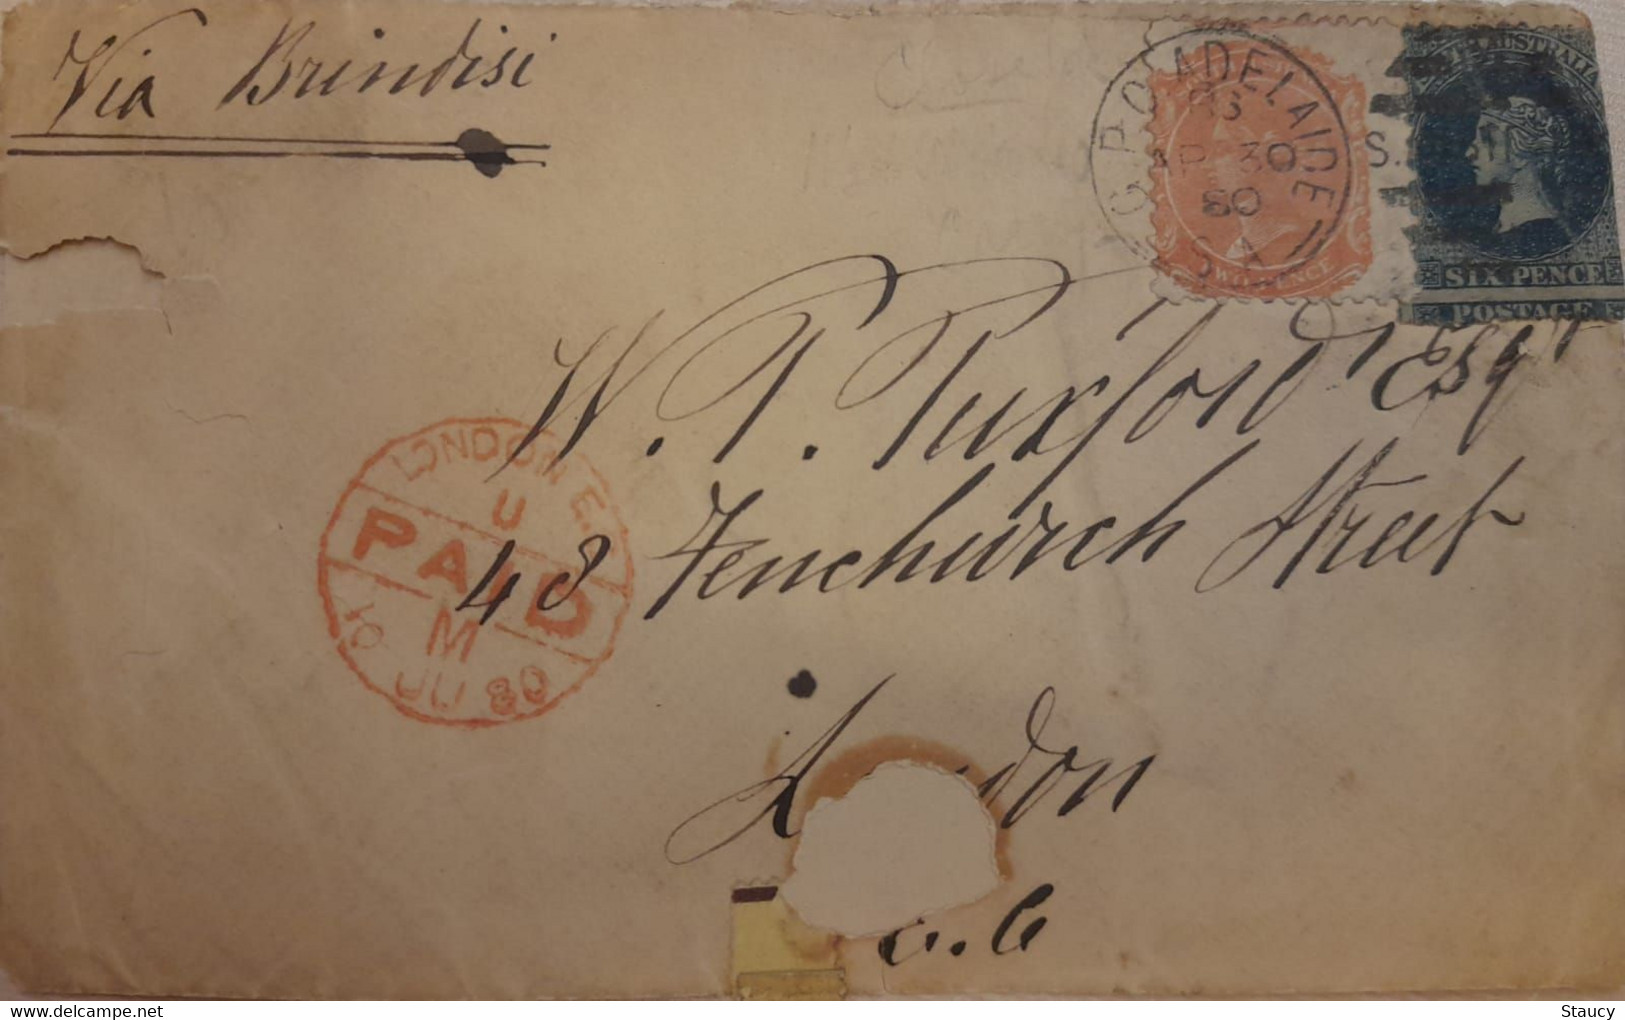 SOUTH AUSTRALIA 1880 QV 6d Blue + 2d ORANGE Franked On Cover Adelaide To LONDON Via Brindisi "LONDON PAID" As Per Scan - Cartas & Documentos